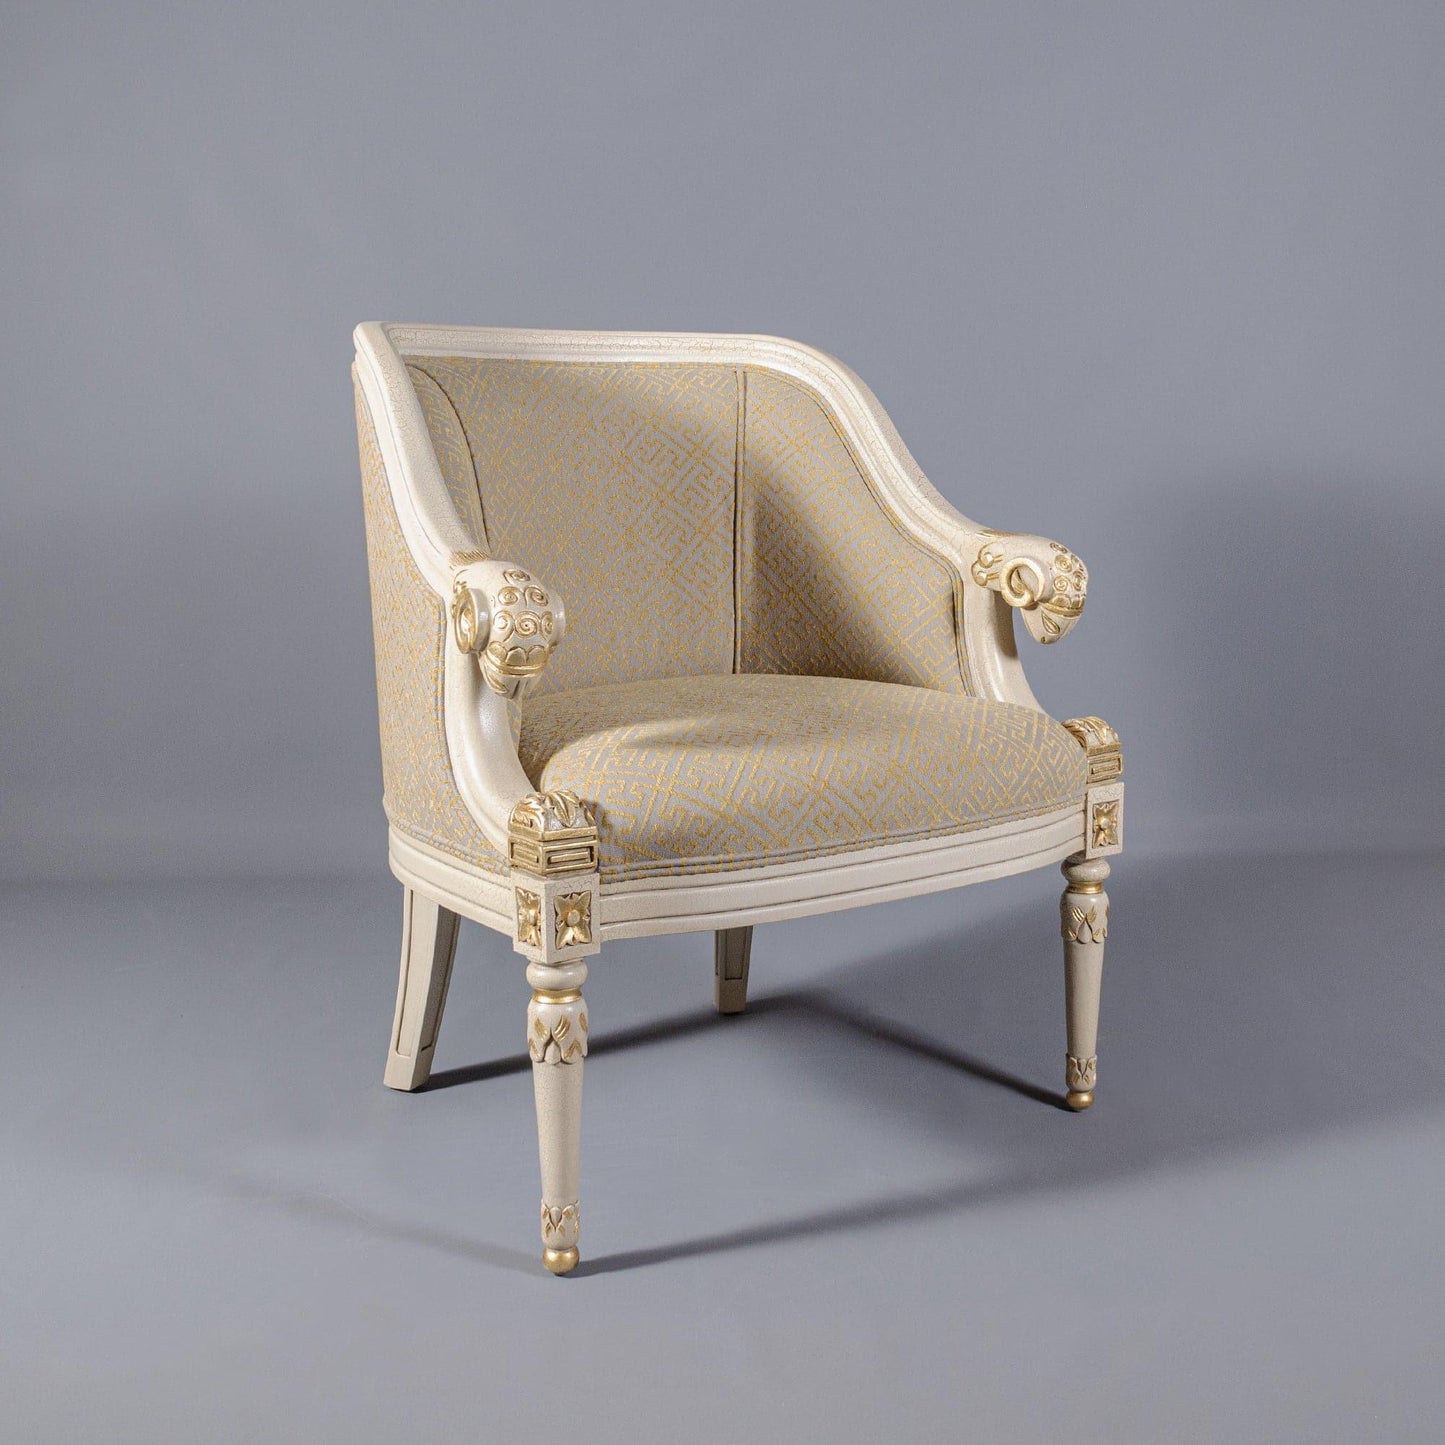 EMPIRE STYLE RAM CHAIR - House of Chippendale